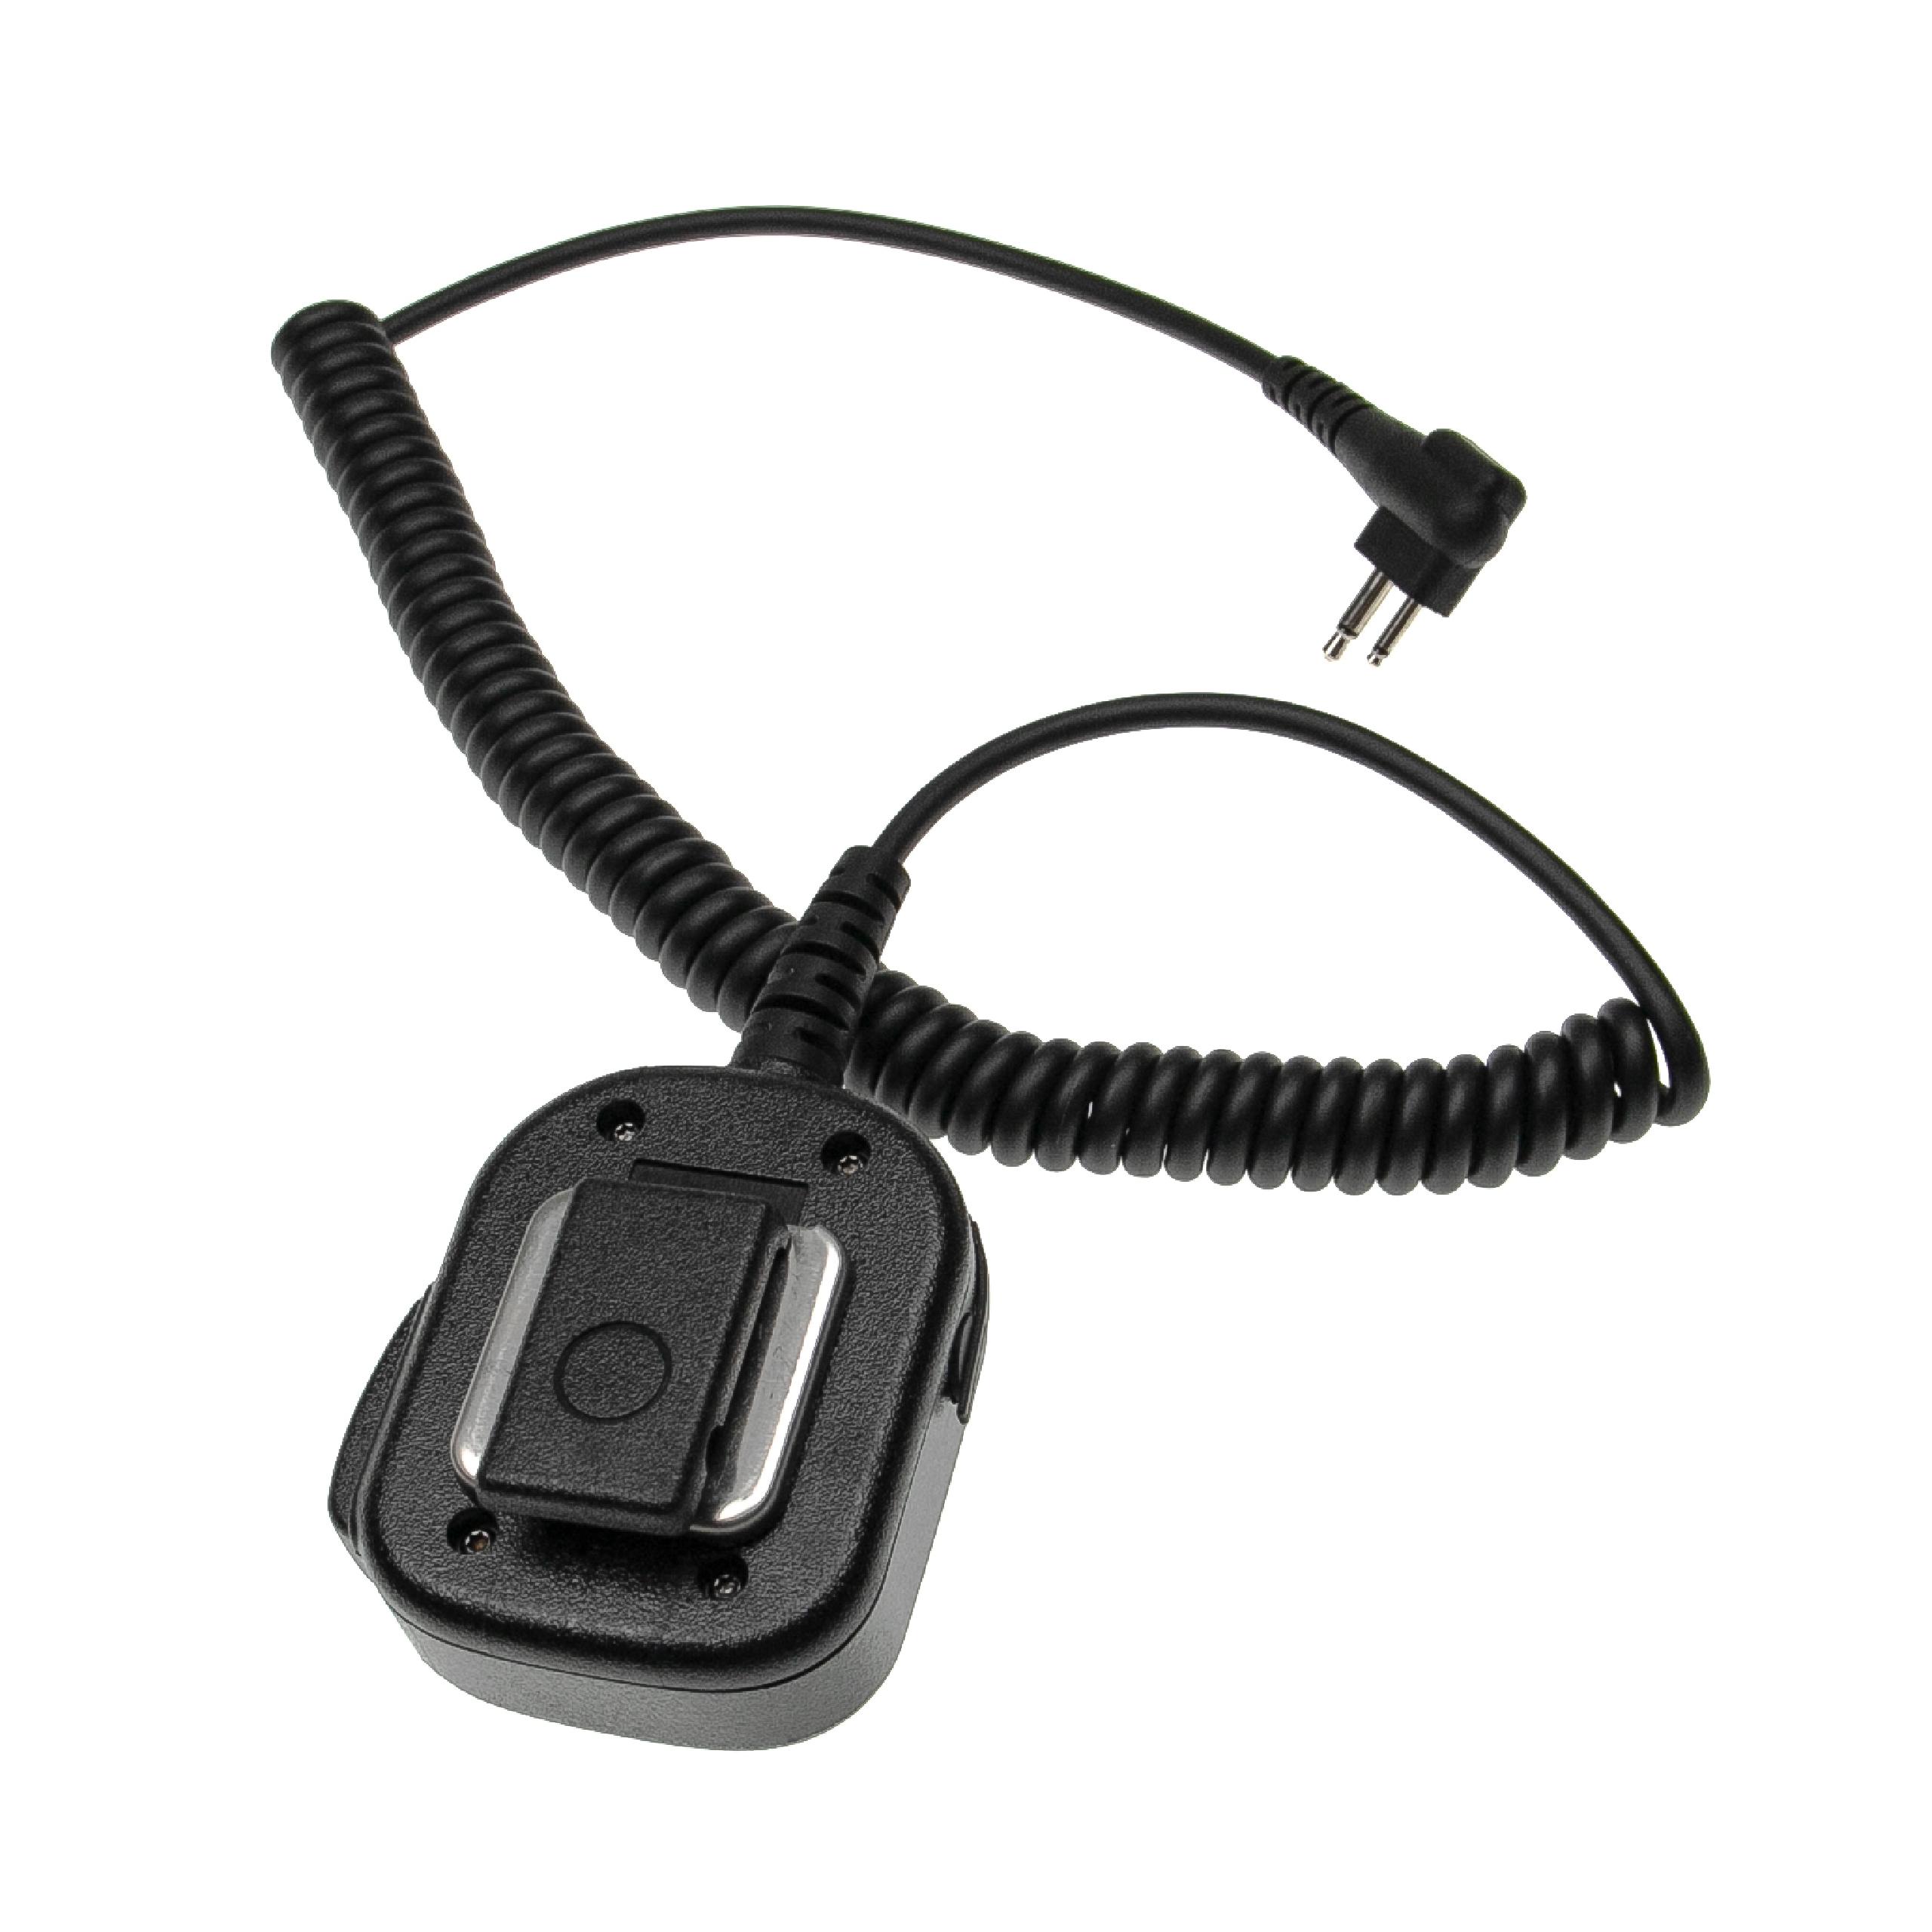 vhbw Speaker Microphone Replacement for Motorola HM150-CP for Walkie Talkie